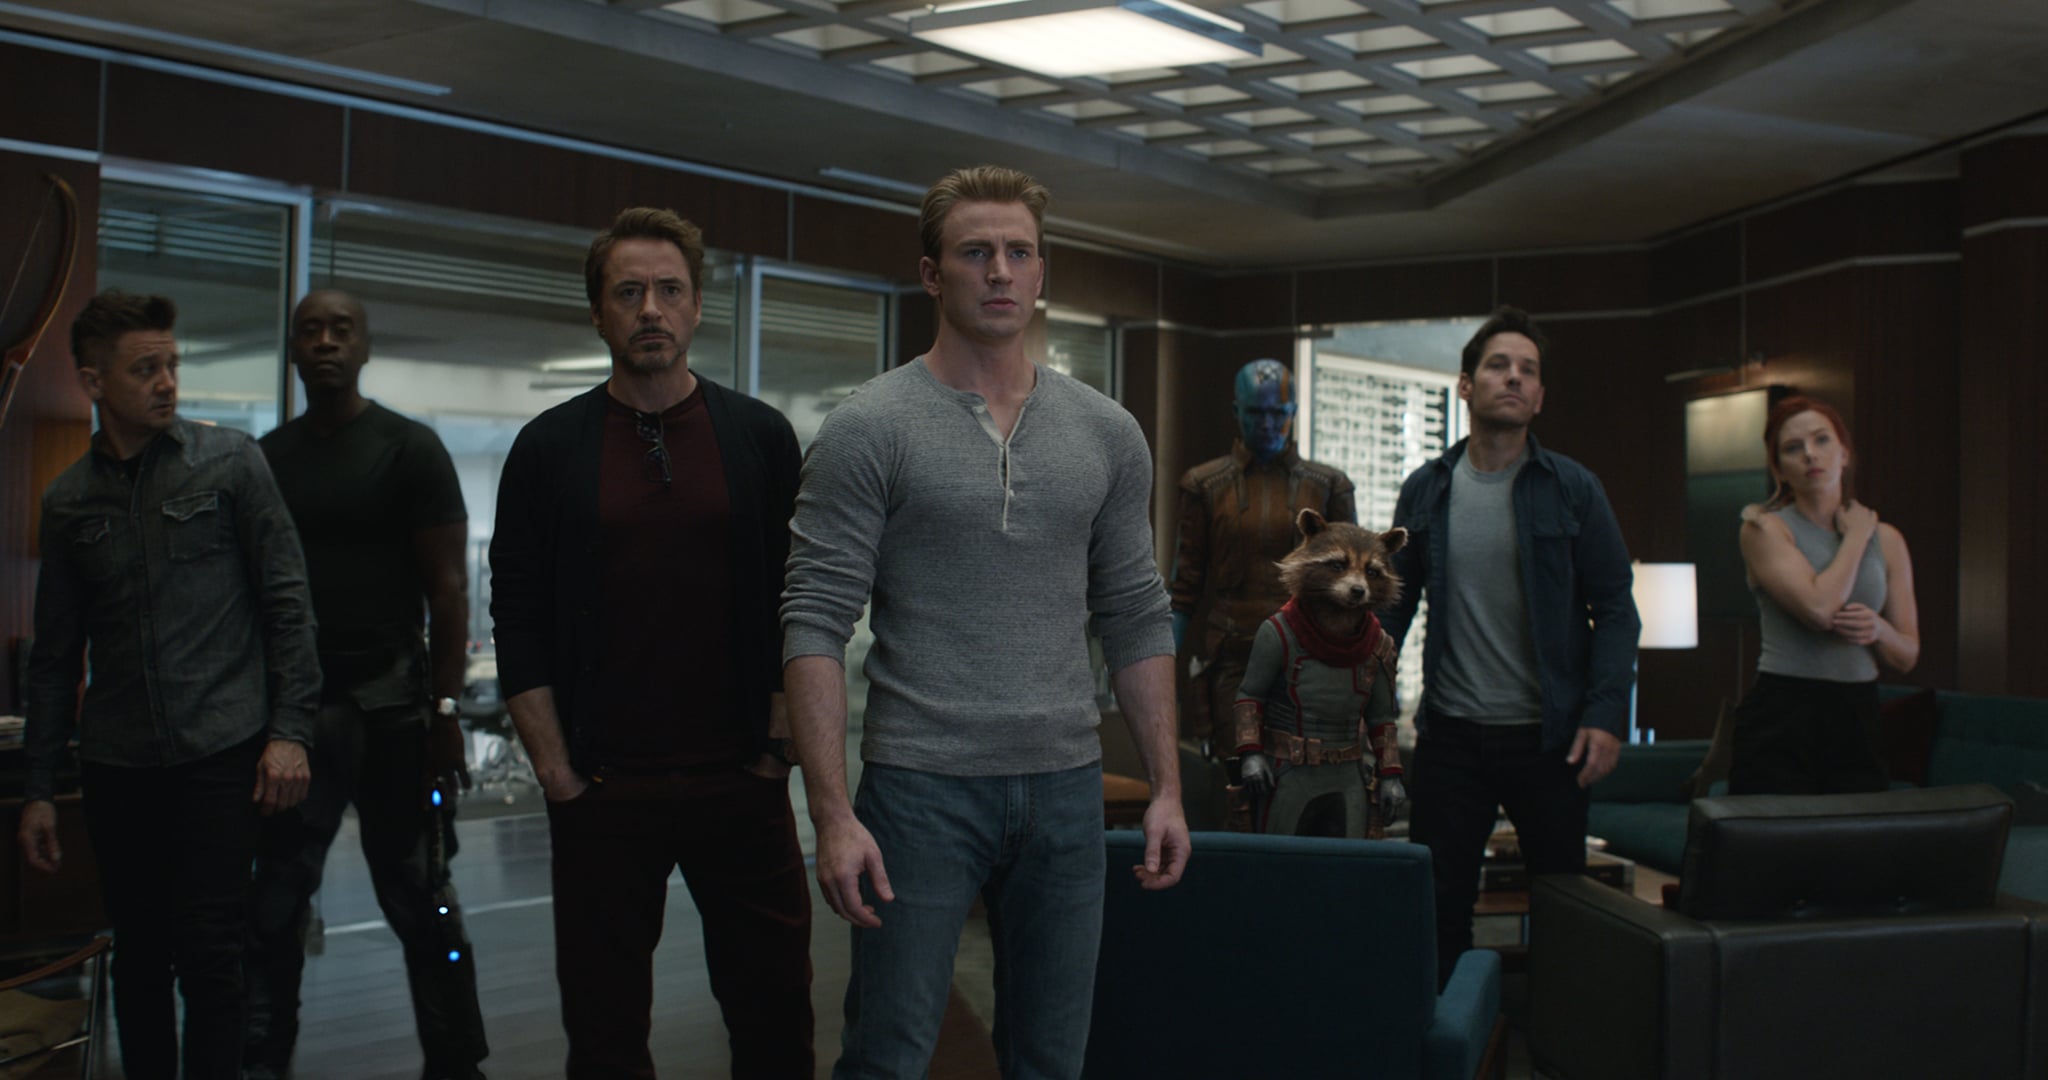 Avengers: Endgame on Digital now and on Blu-ray, DVD, and 4K on August 13!